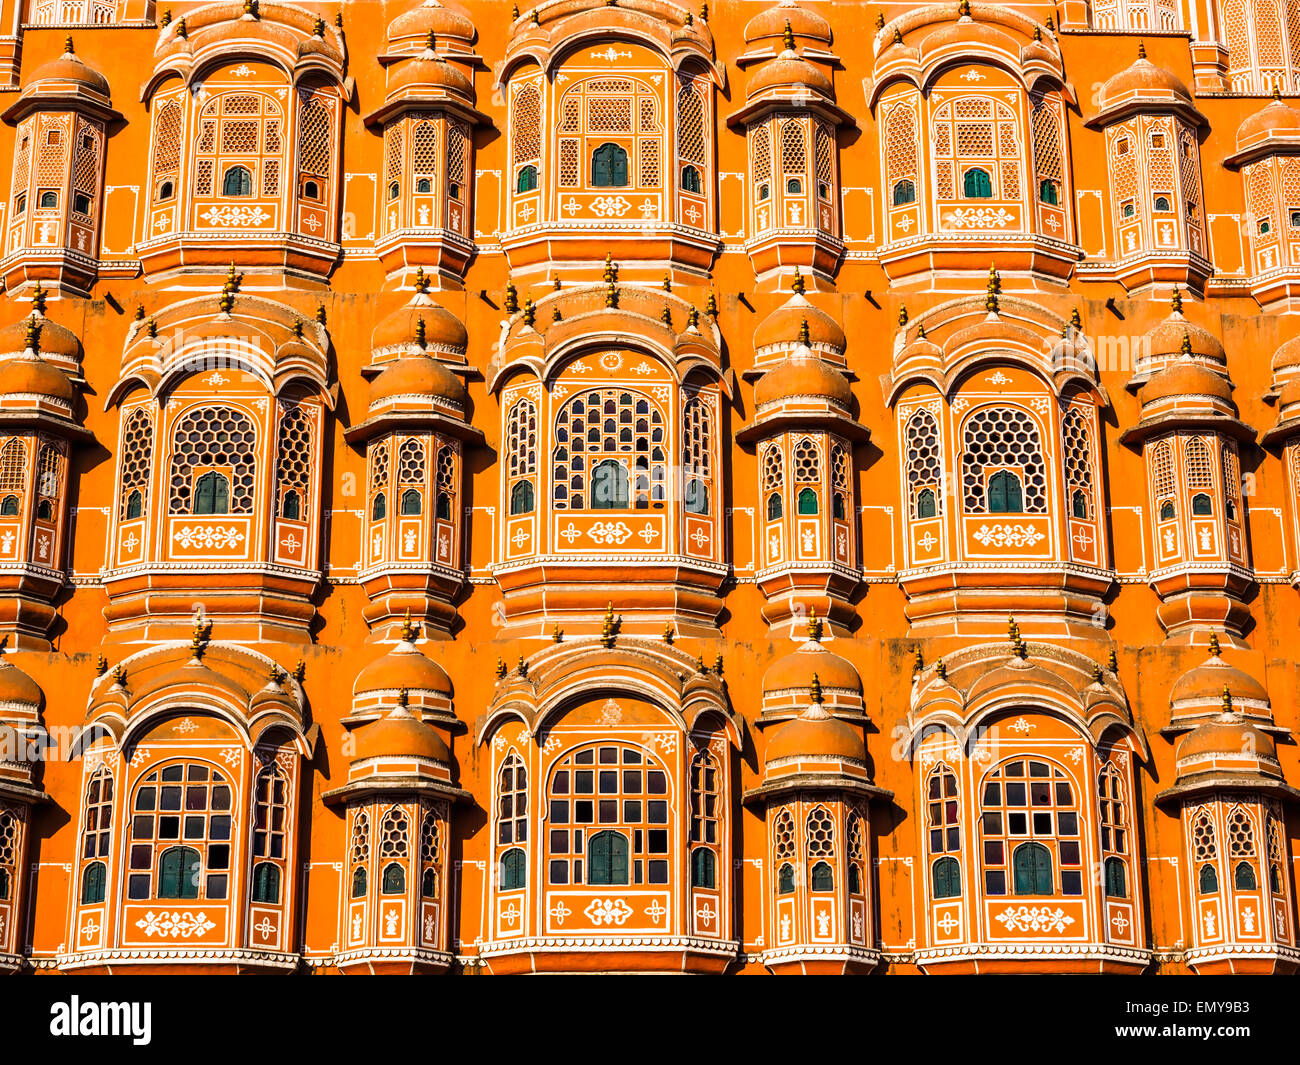 Hawa Mahal, the palace of wind located in Jaipur, Rajasthan, India ...